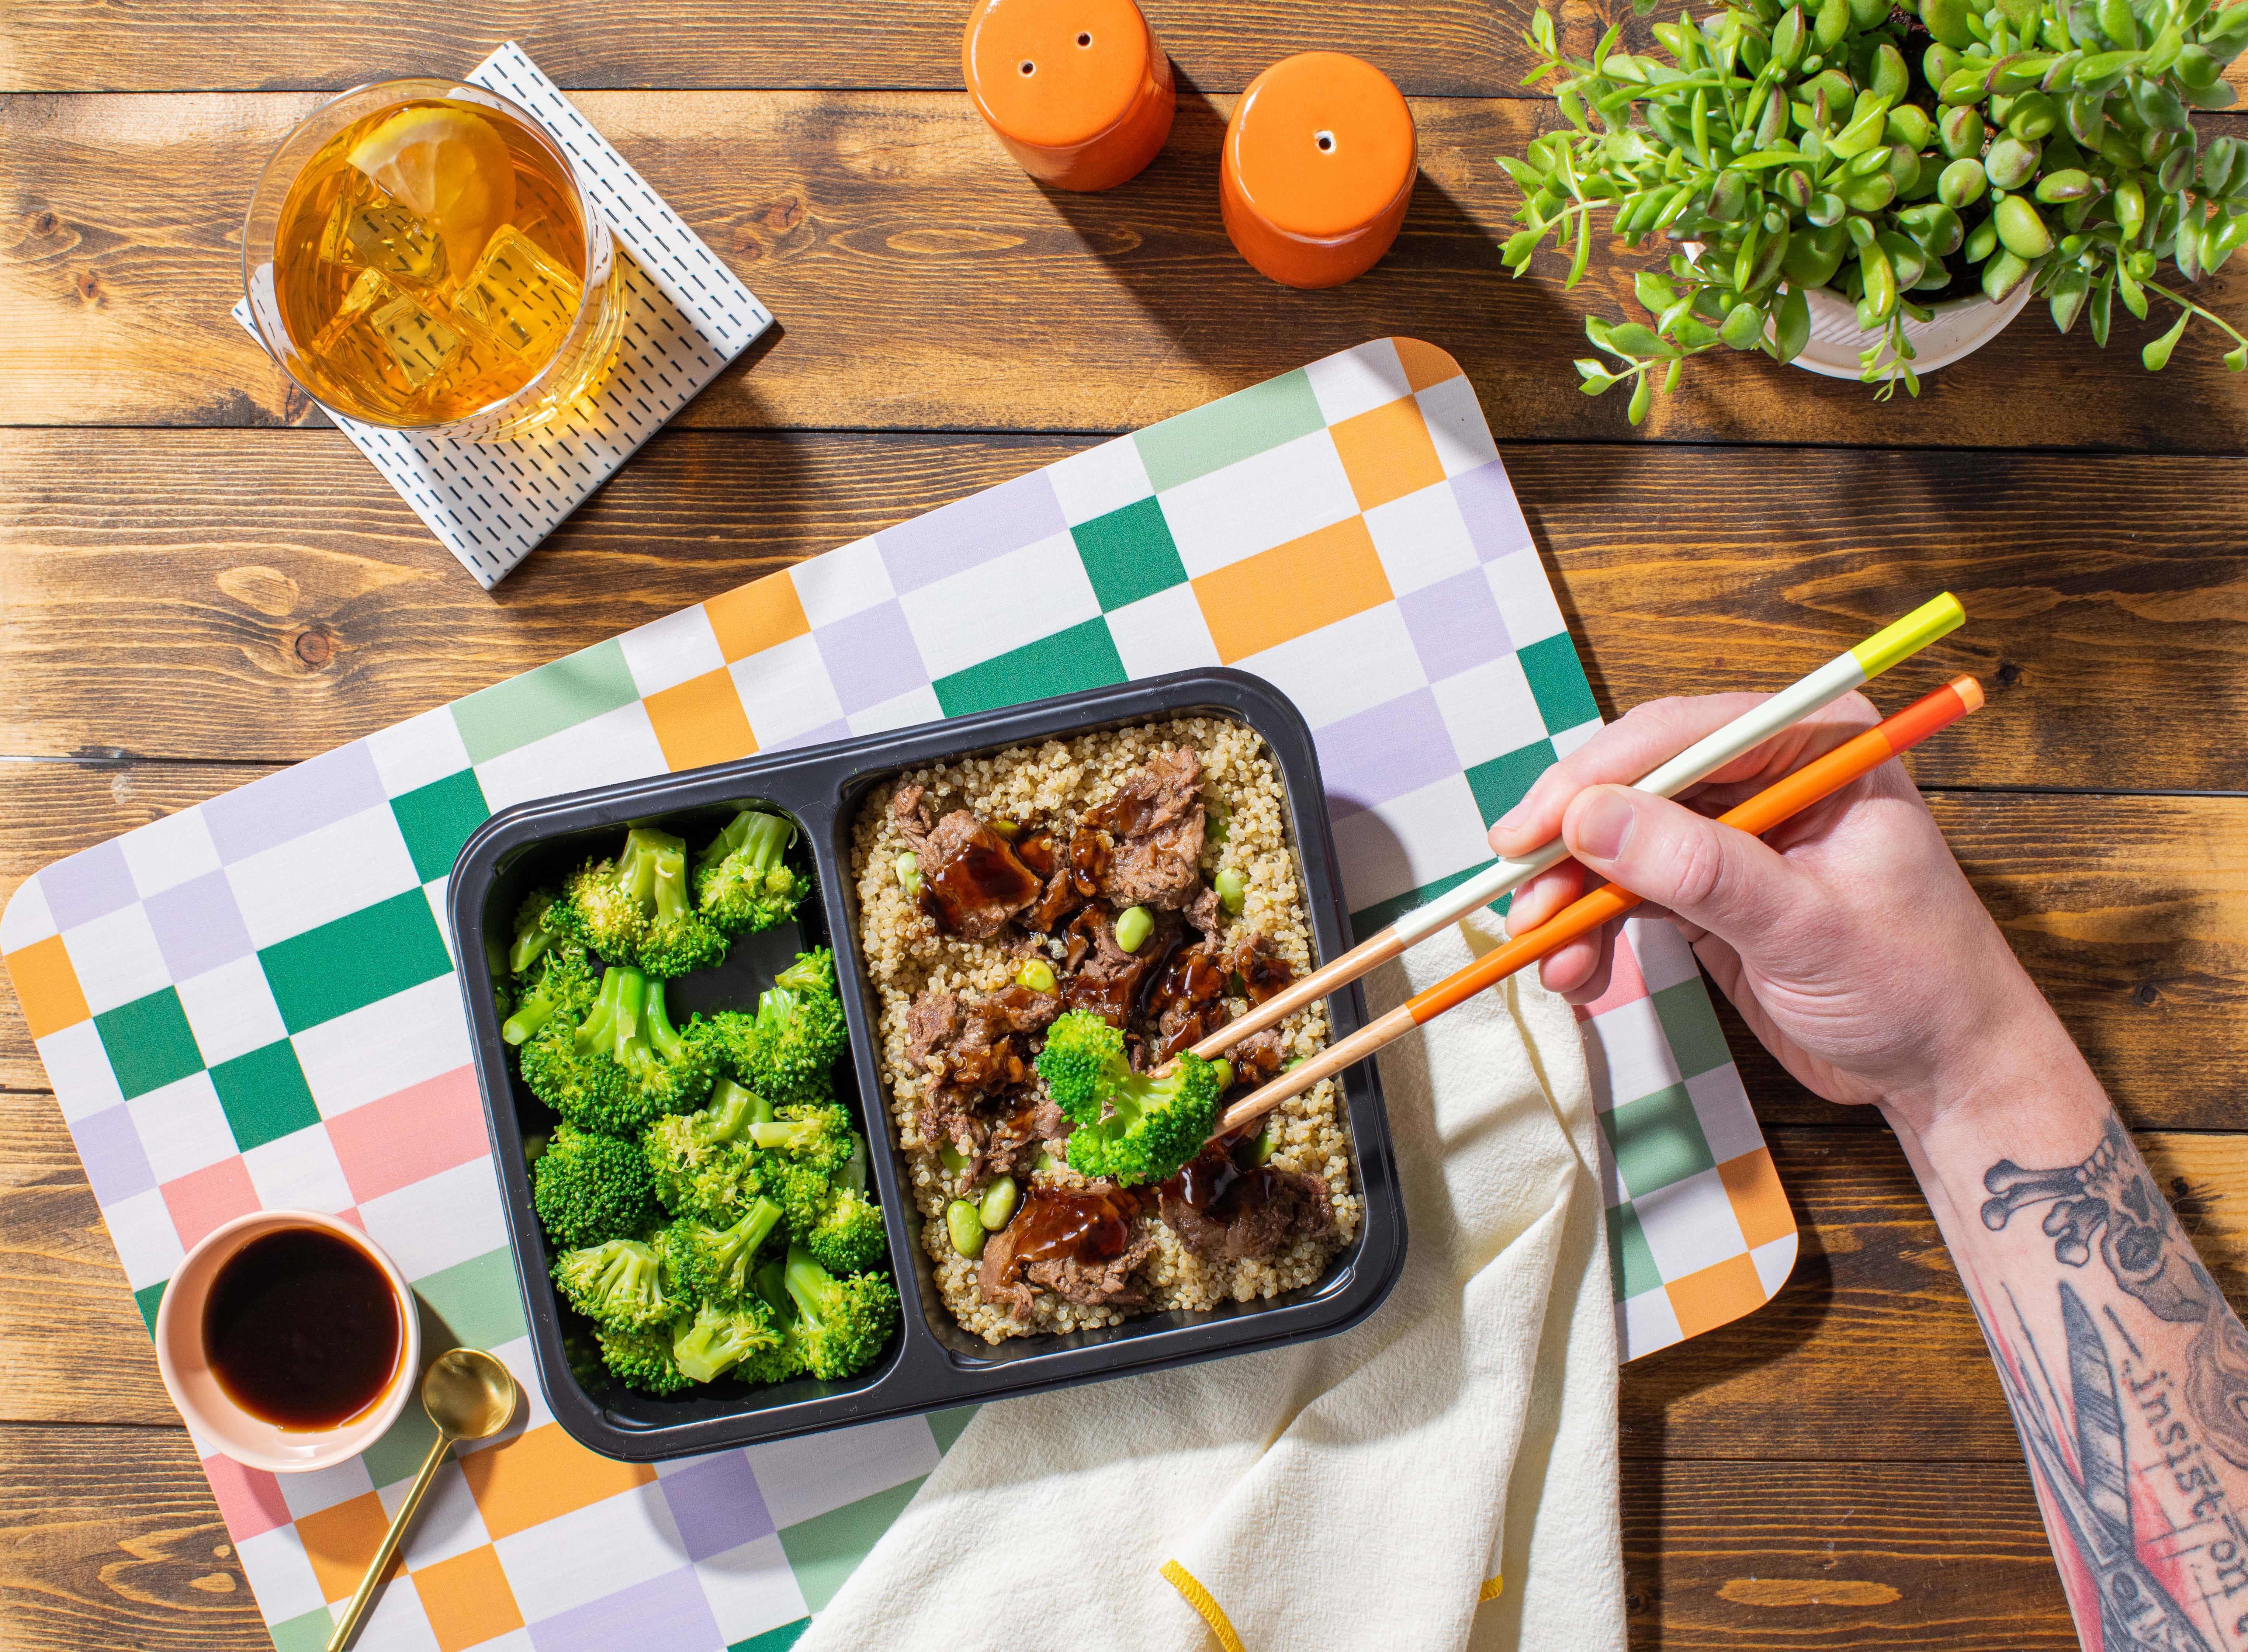 The Tempo Black Pepper Beef dish on a table, with a hand holding chopsticks, ready to eat